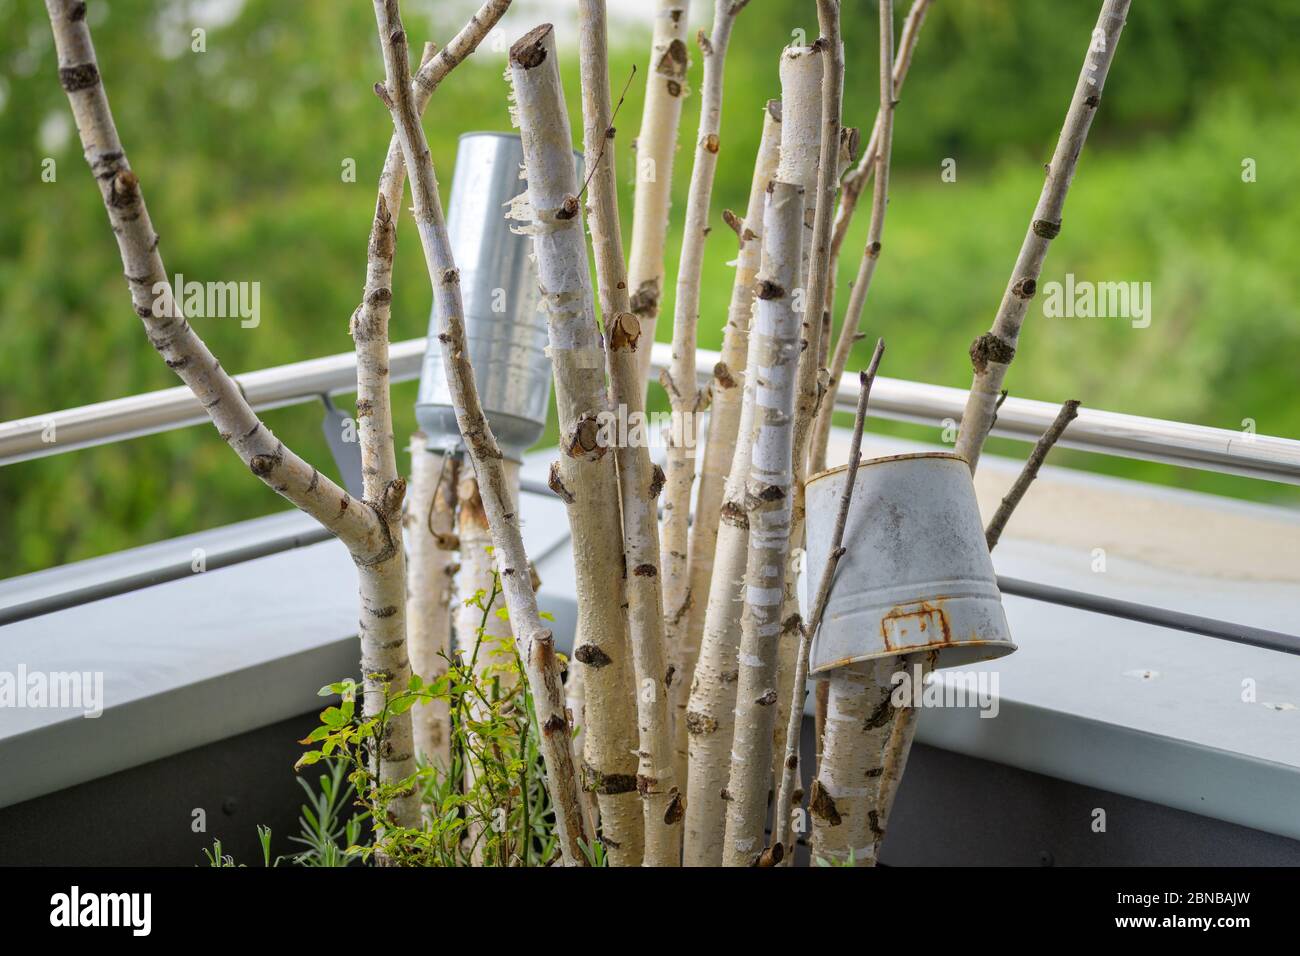 Two metal containers hanging on a plant which has been pruned back for winter outdoors on a balcony against a lush green spring background Stock Photo